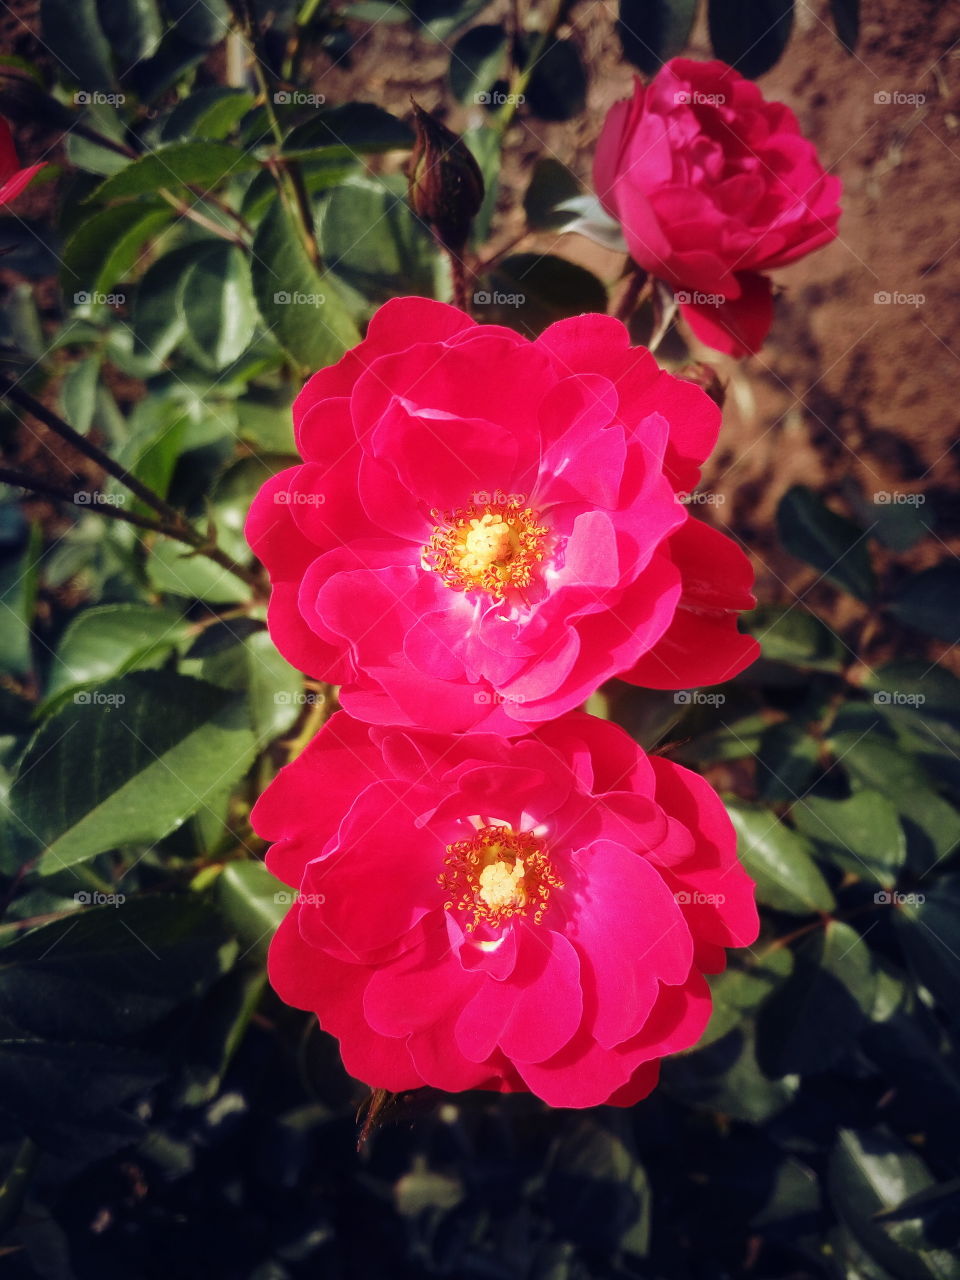 the most beautiful rose flowers in my garden